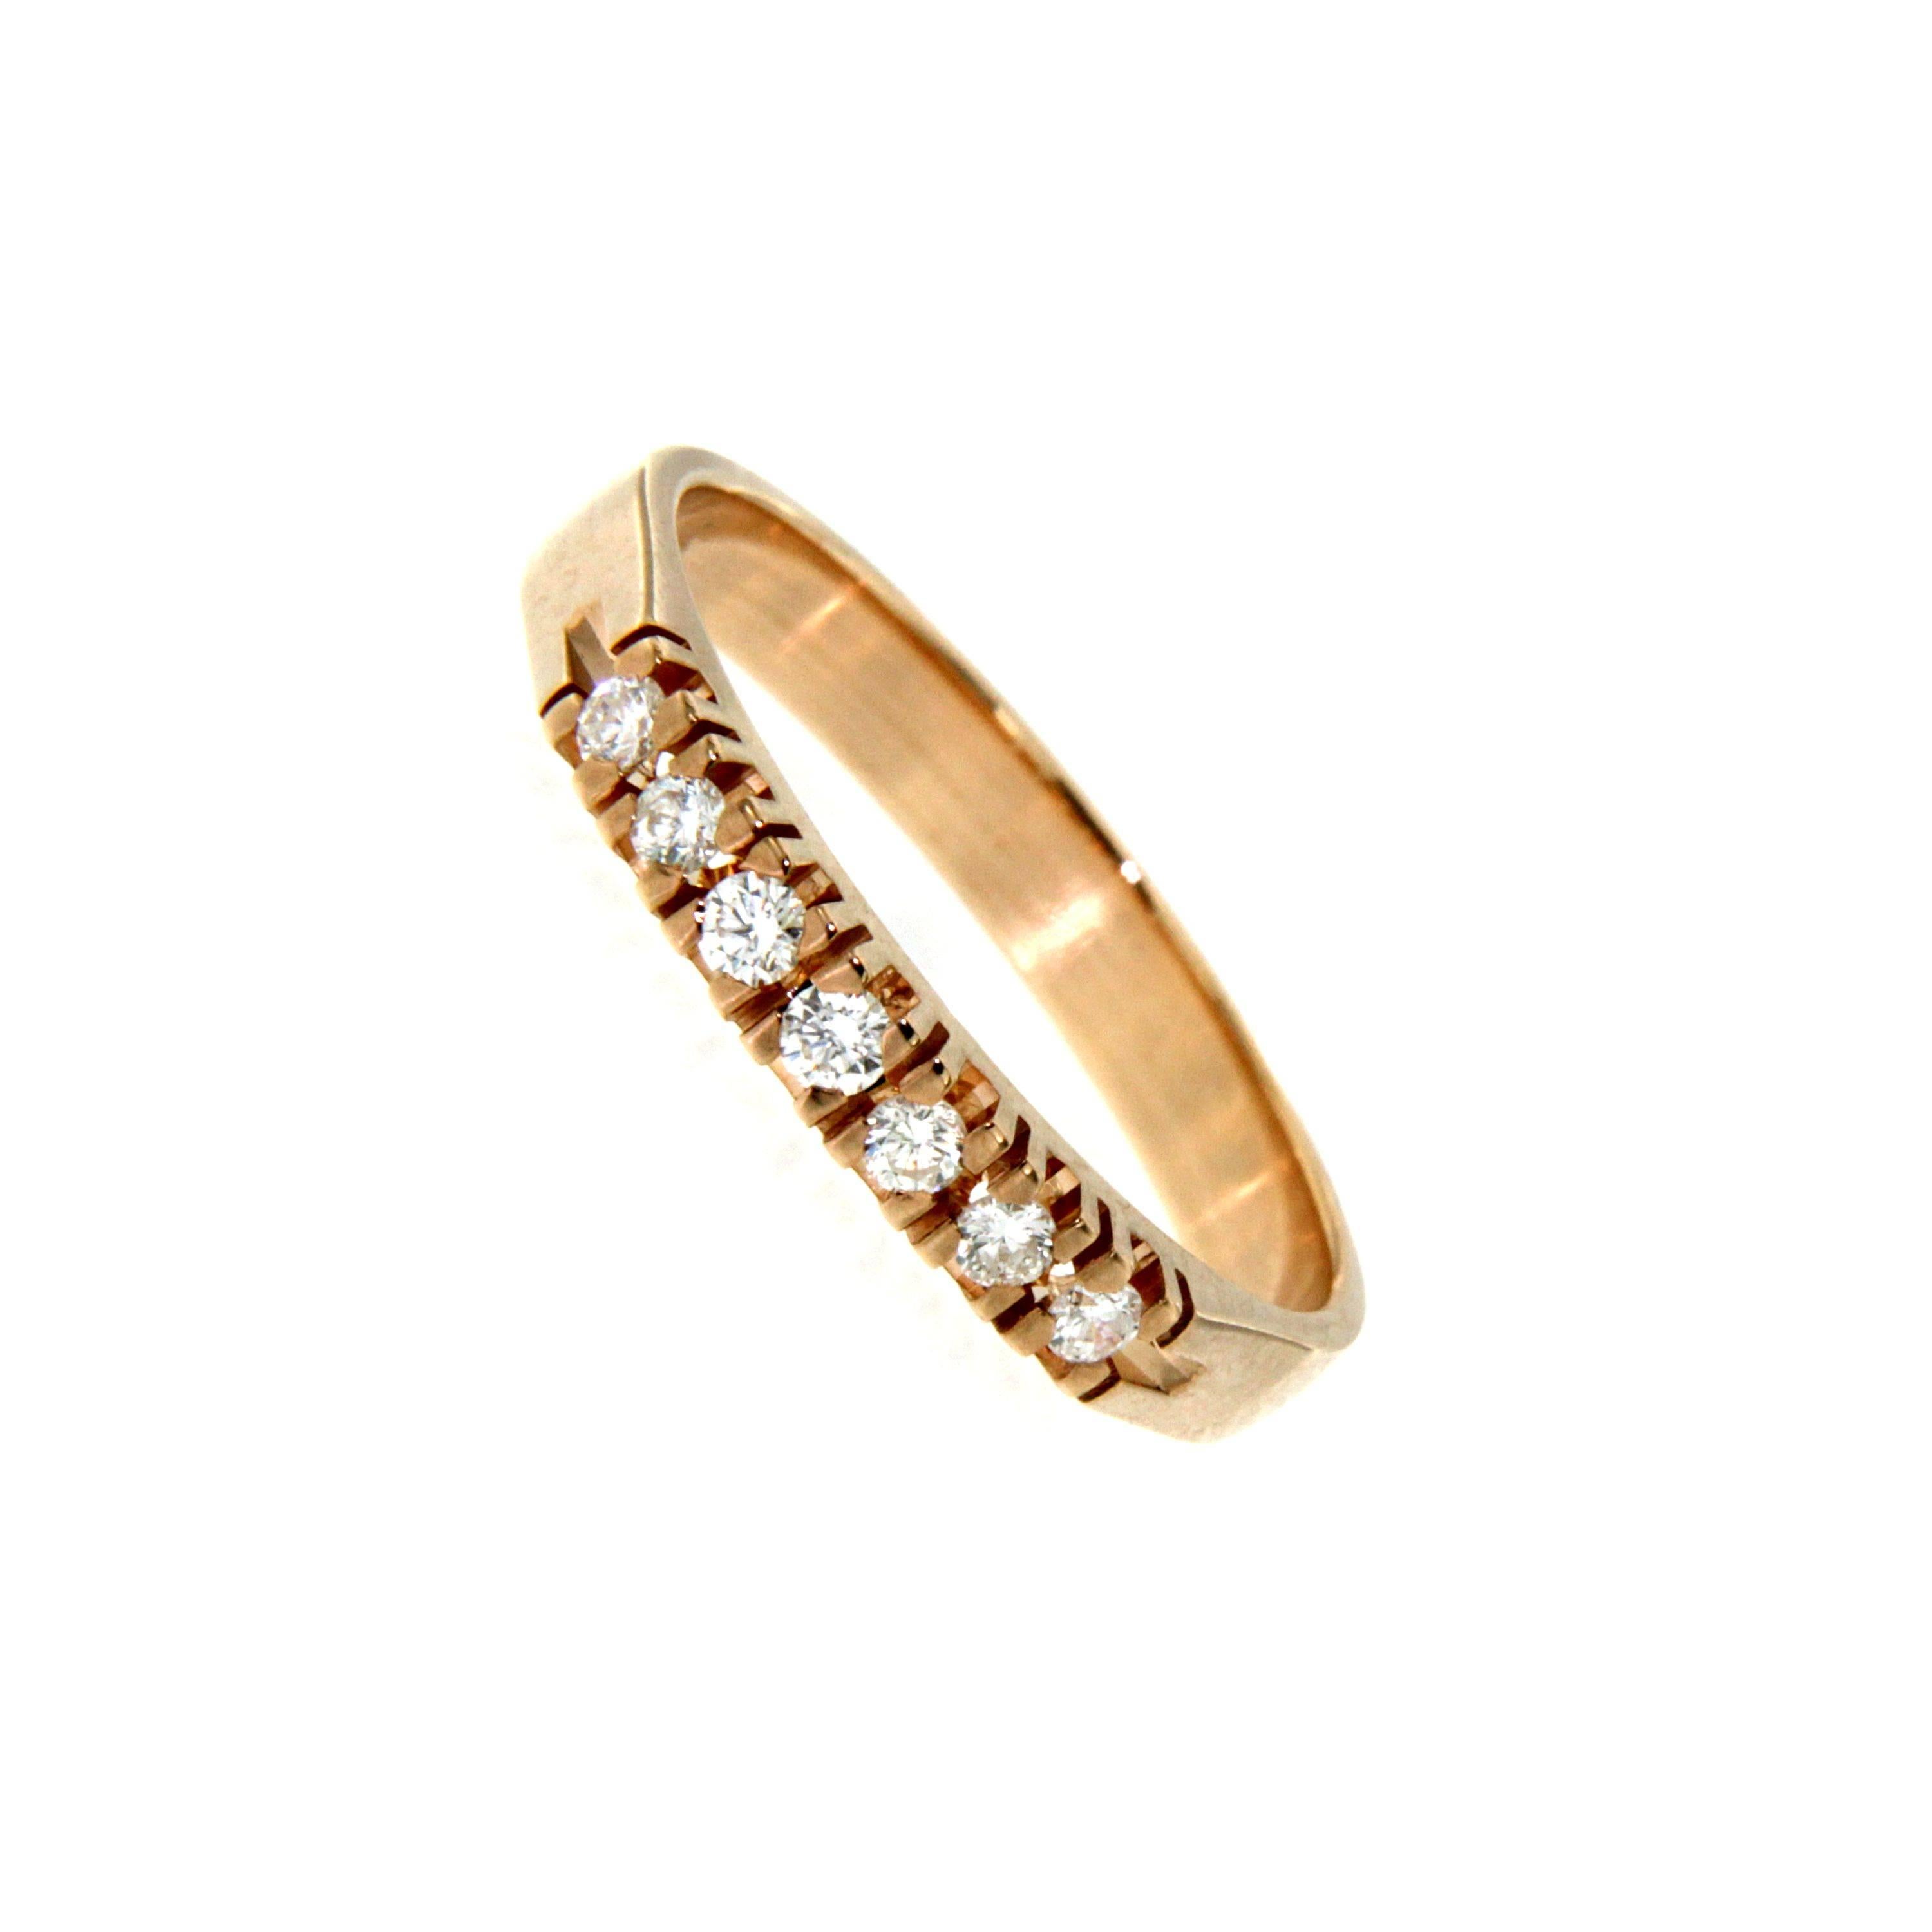 Crafted from 18k rose gold this contemporary piece is encrusted with a continuous line of 0.30 cts sparkling pavé diamonds G color Vvs clarity, along the band. Wear yours alone or stacked with other styles.

CONDITION: Brand New

METAL: 18k Rose